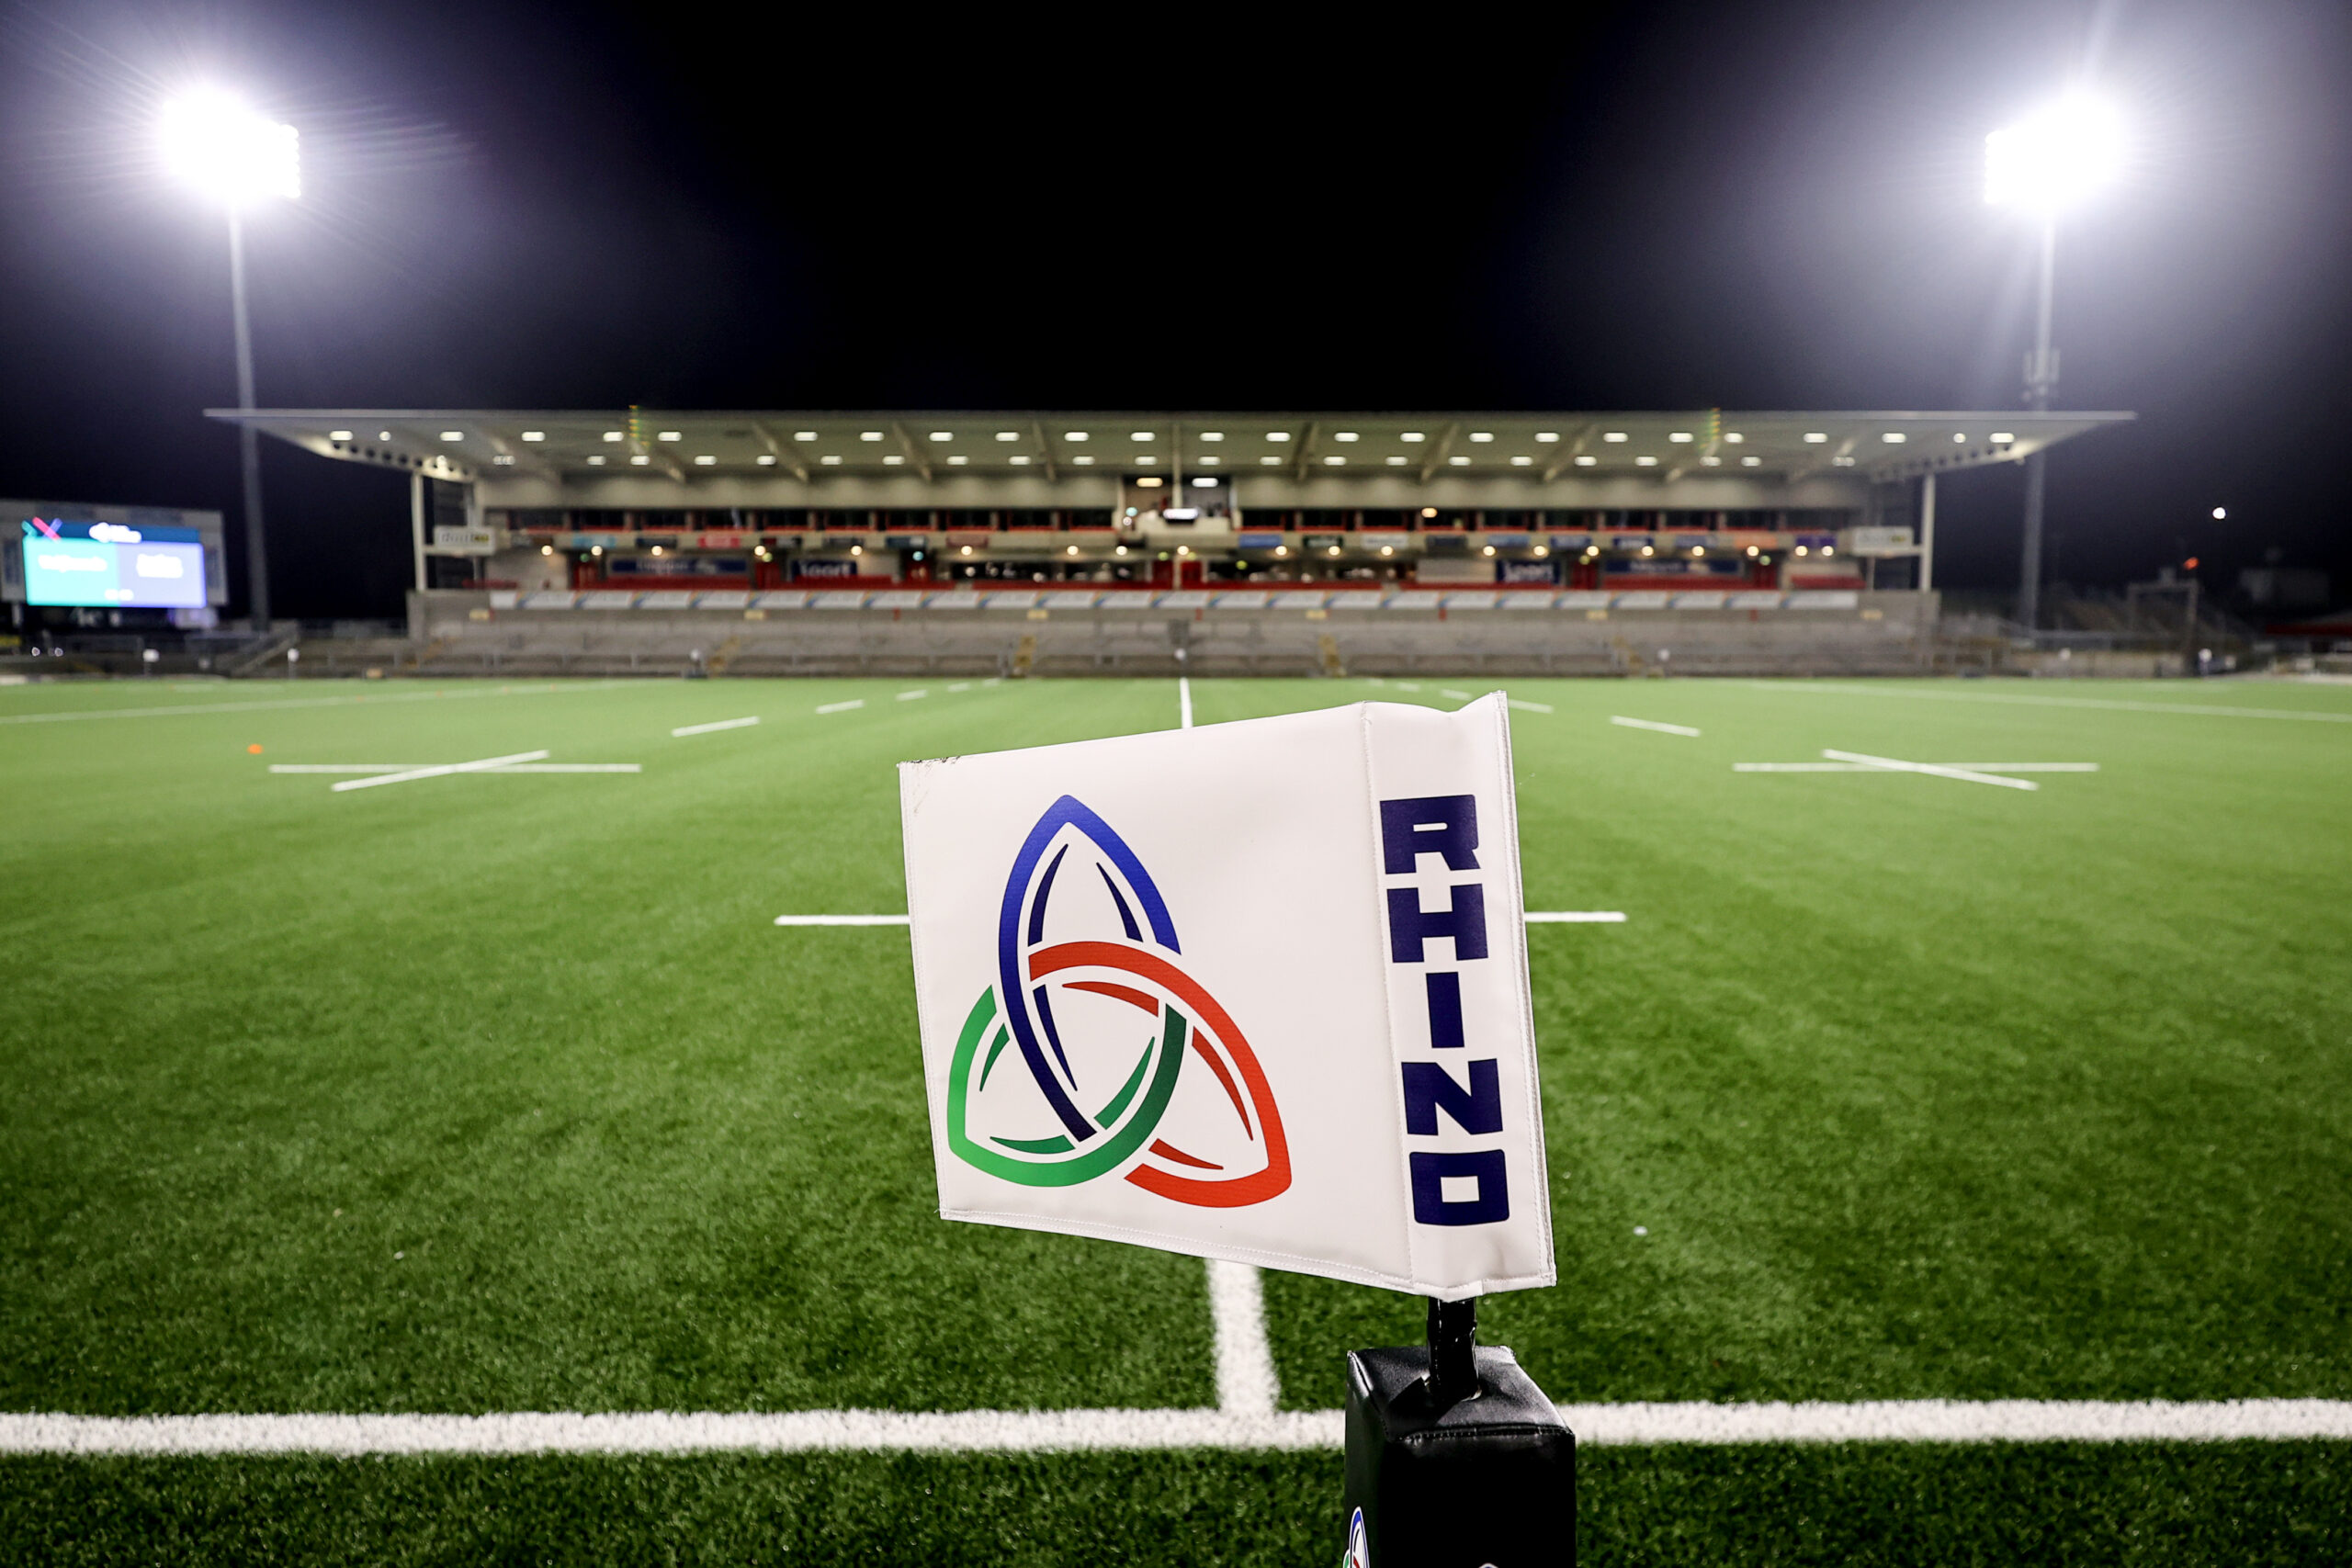 A general view of Kingspan Stadium ahead of a game from the Half Way line.